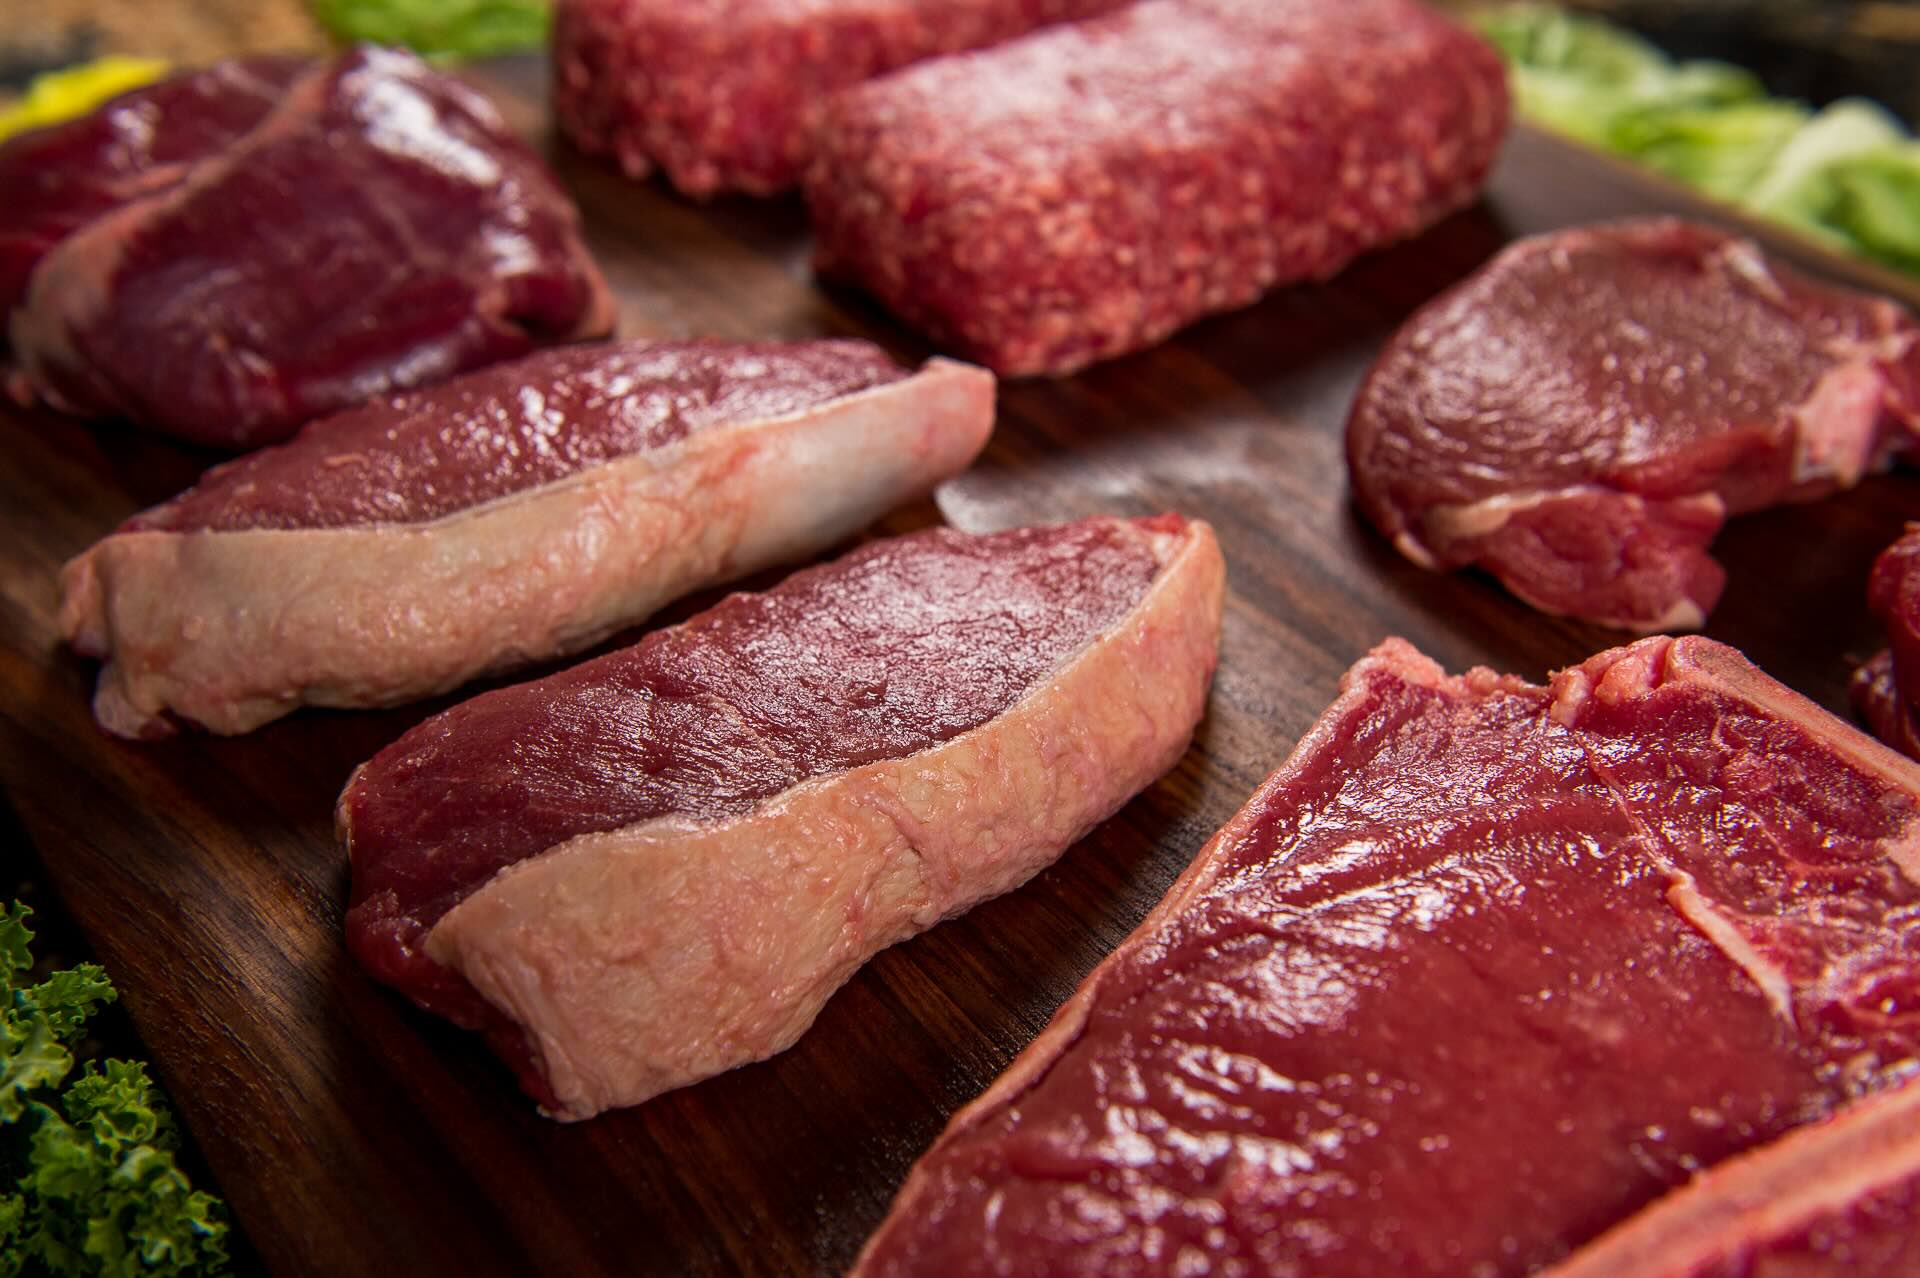 How Is Grass-Fed Beef Better For You